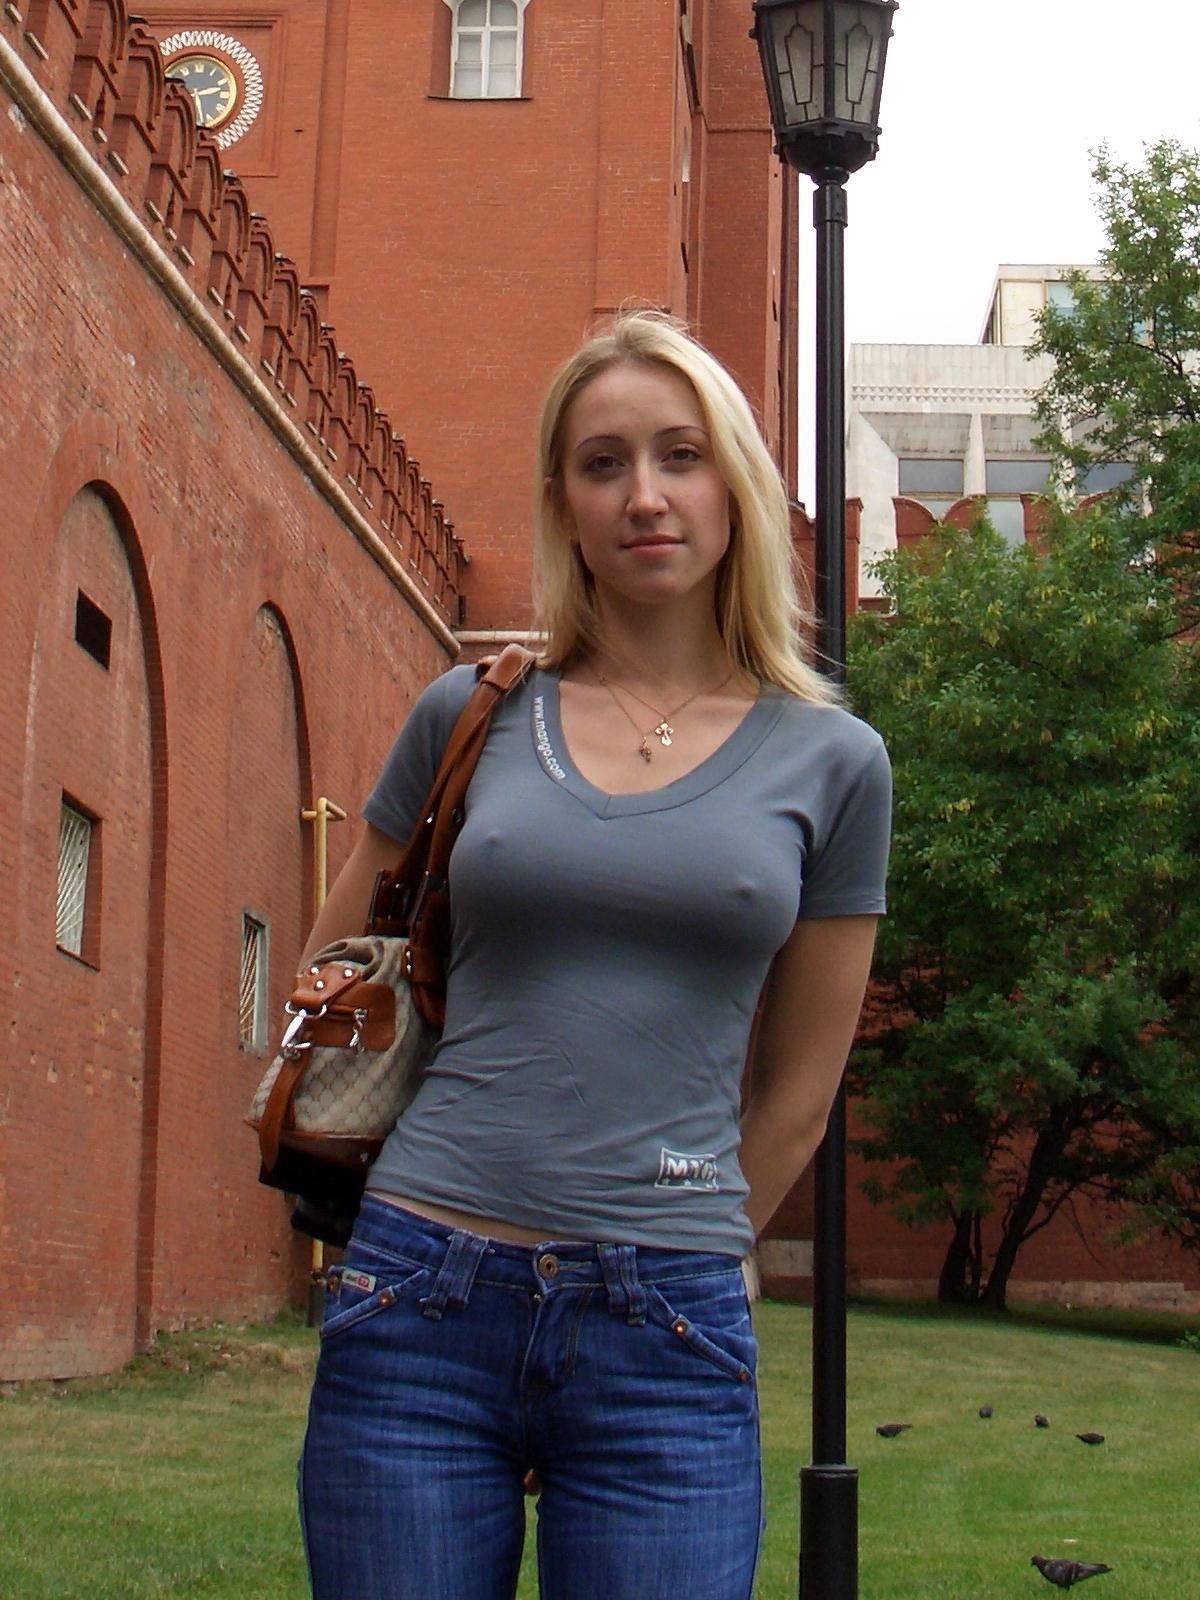 blonde-amateur-russian-outdoor-boobs-naked-jeans-public-06